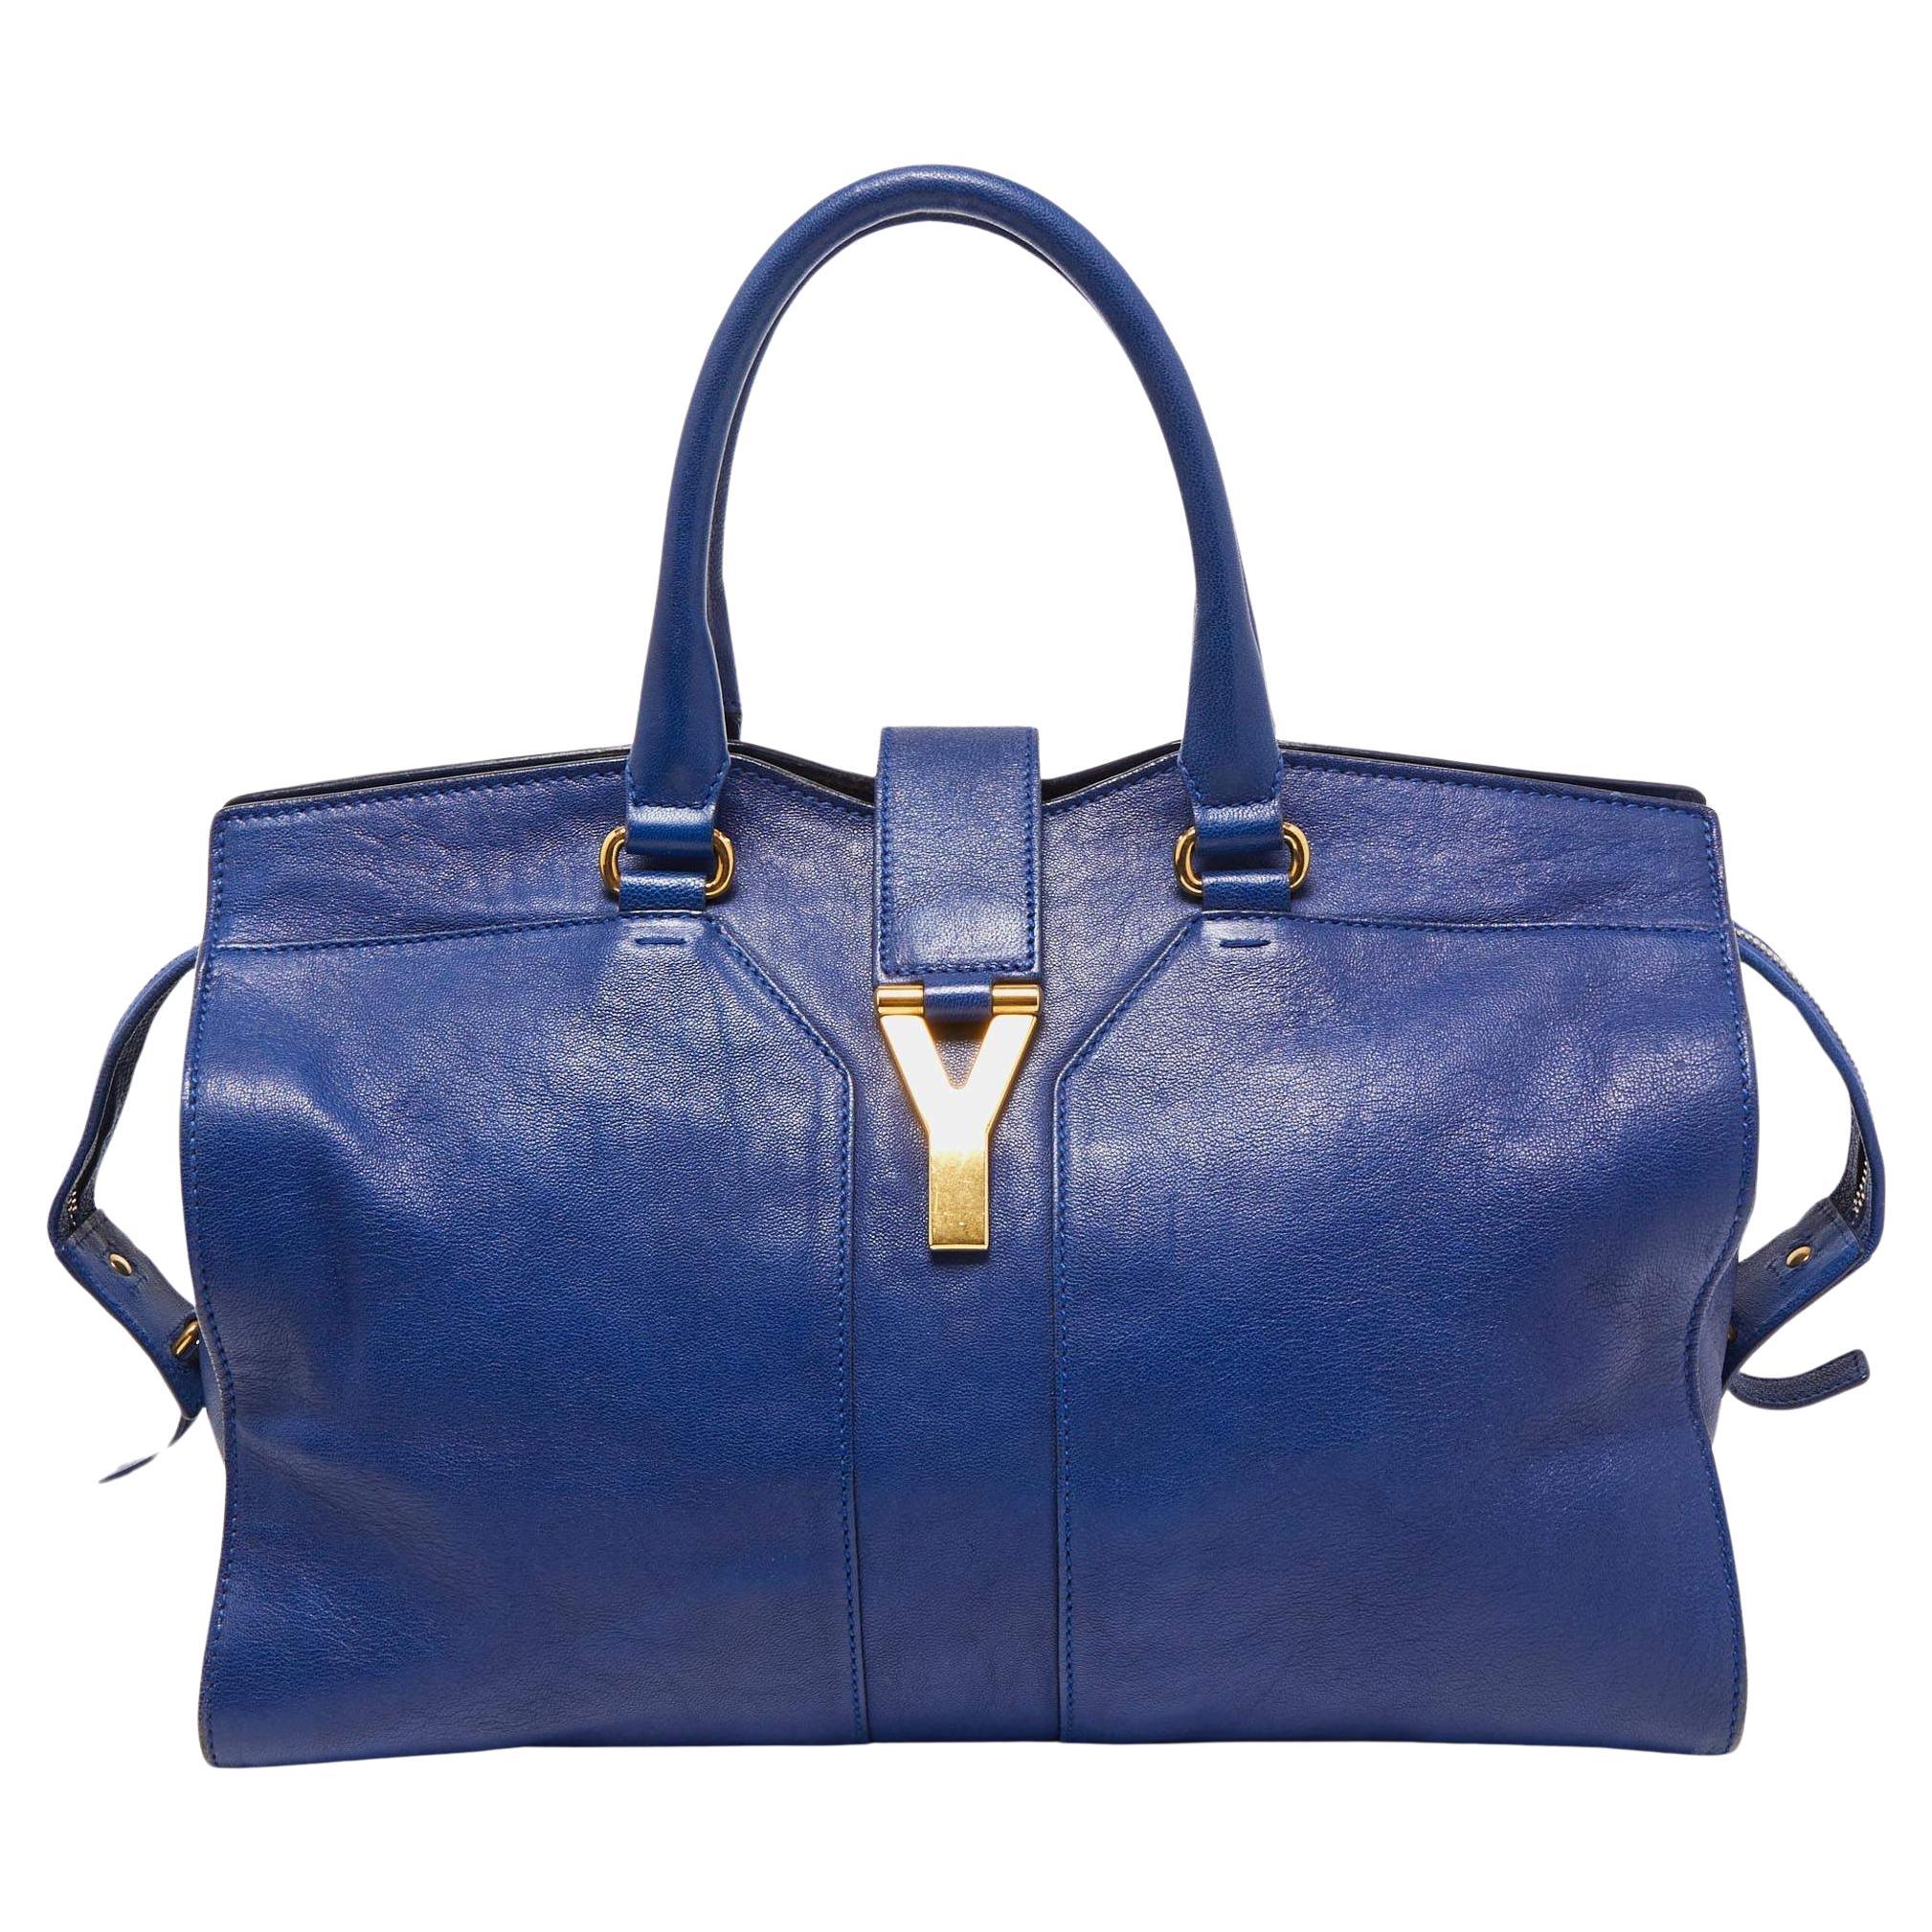 Yves Saint Laurent Blue Leather Medium Cabas Chyc Tote For Sale